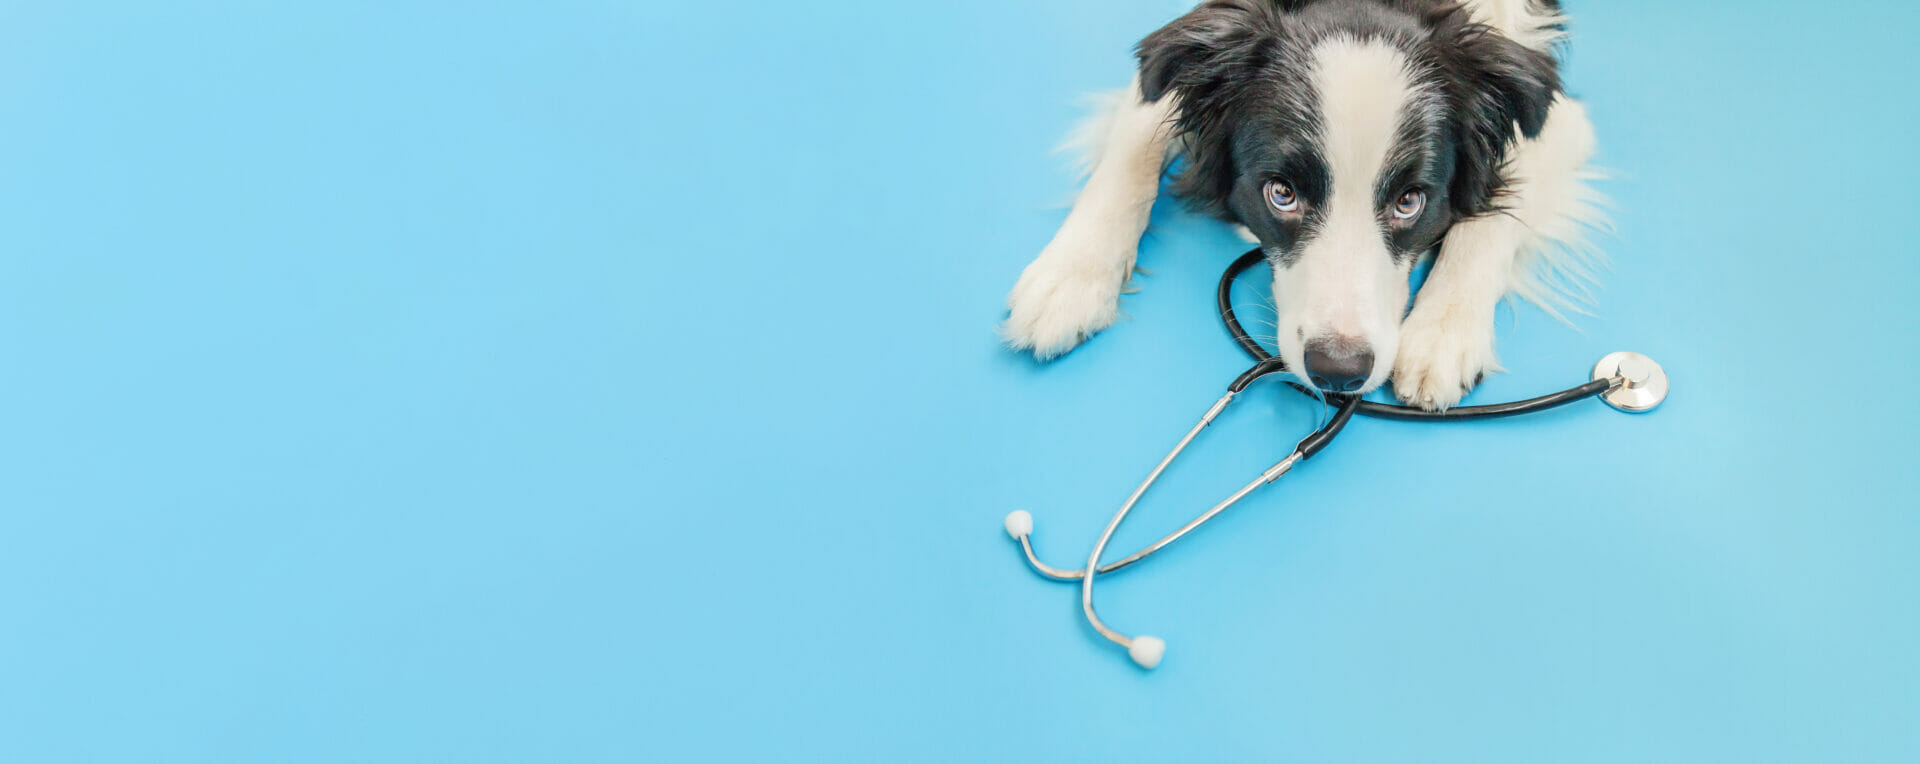 Dog with stethescope